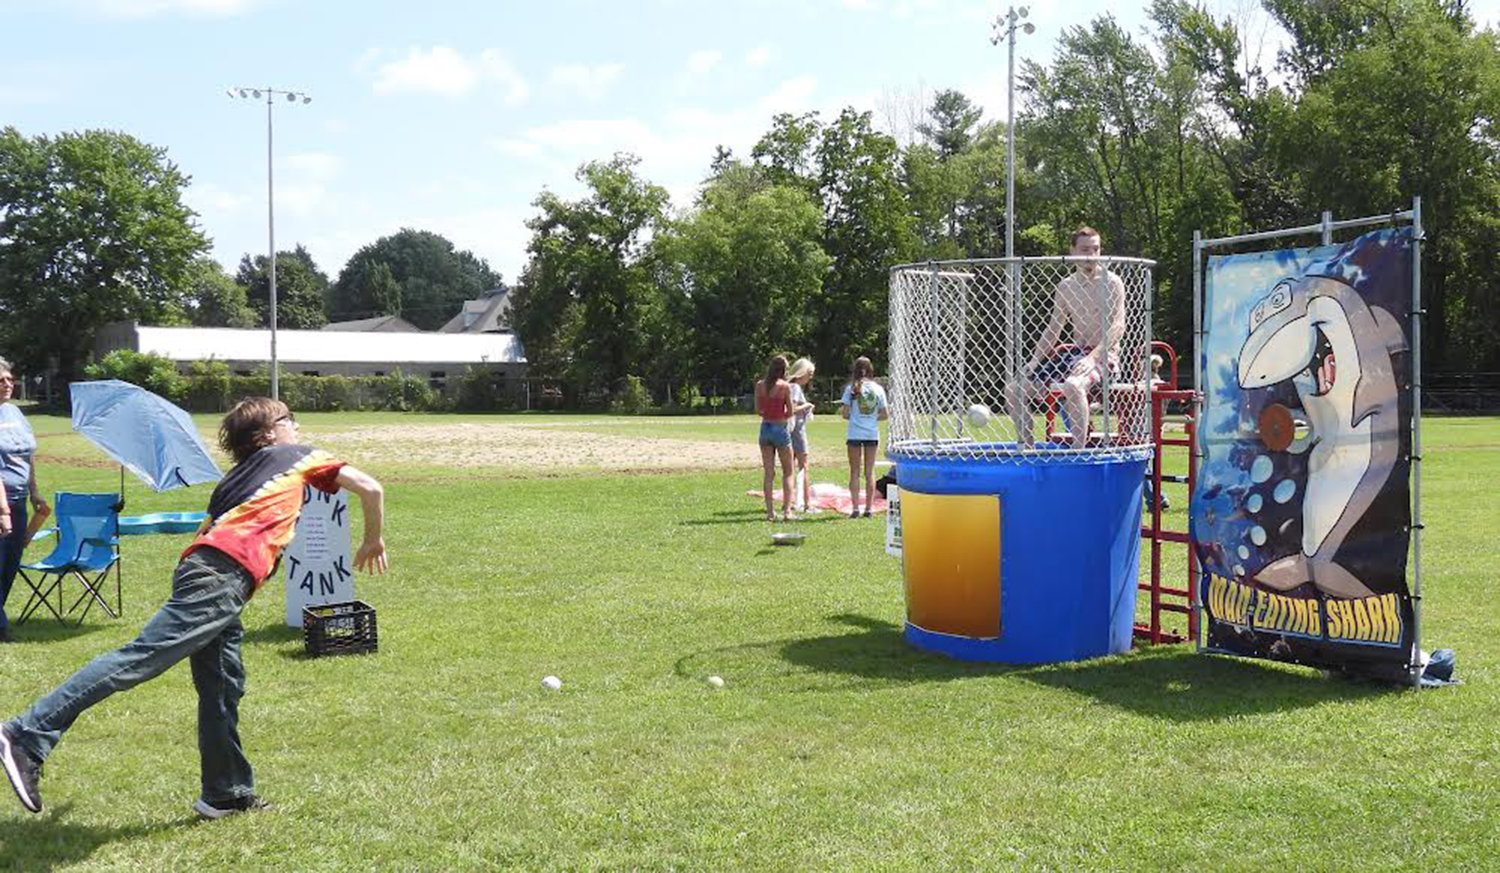 A dunk tank and other fun activities will be at this year’s Woofstock taking place on Saturday, Aug. 13, from 11 a.m. to 4 p.m. at Veterans Memorial Field, 360 N. Main St., Oneida.